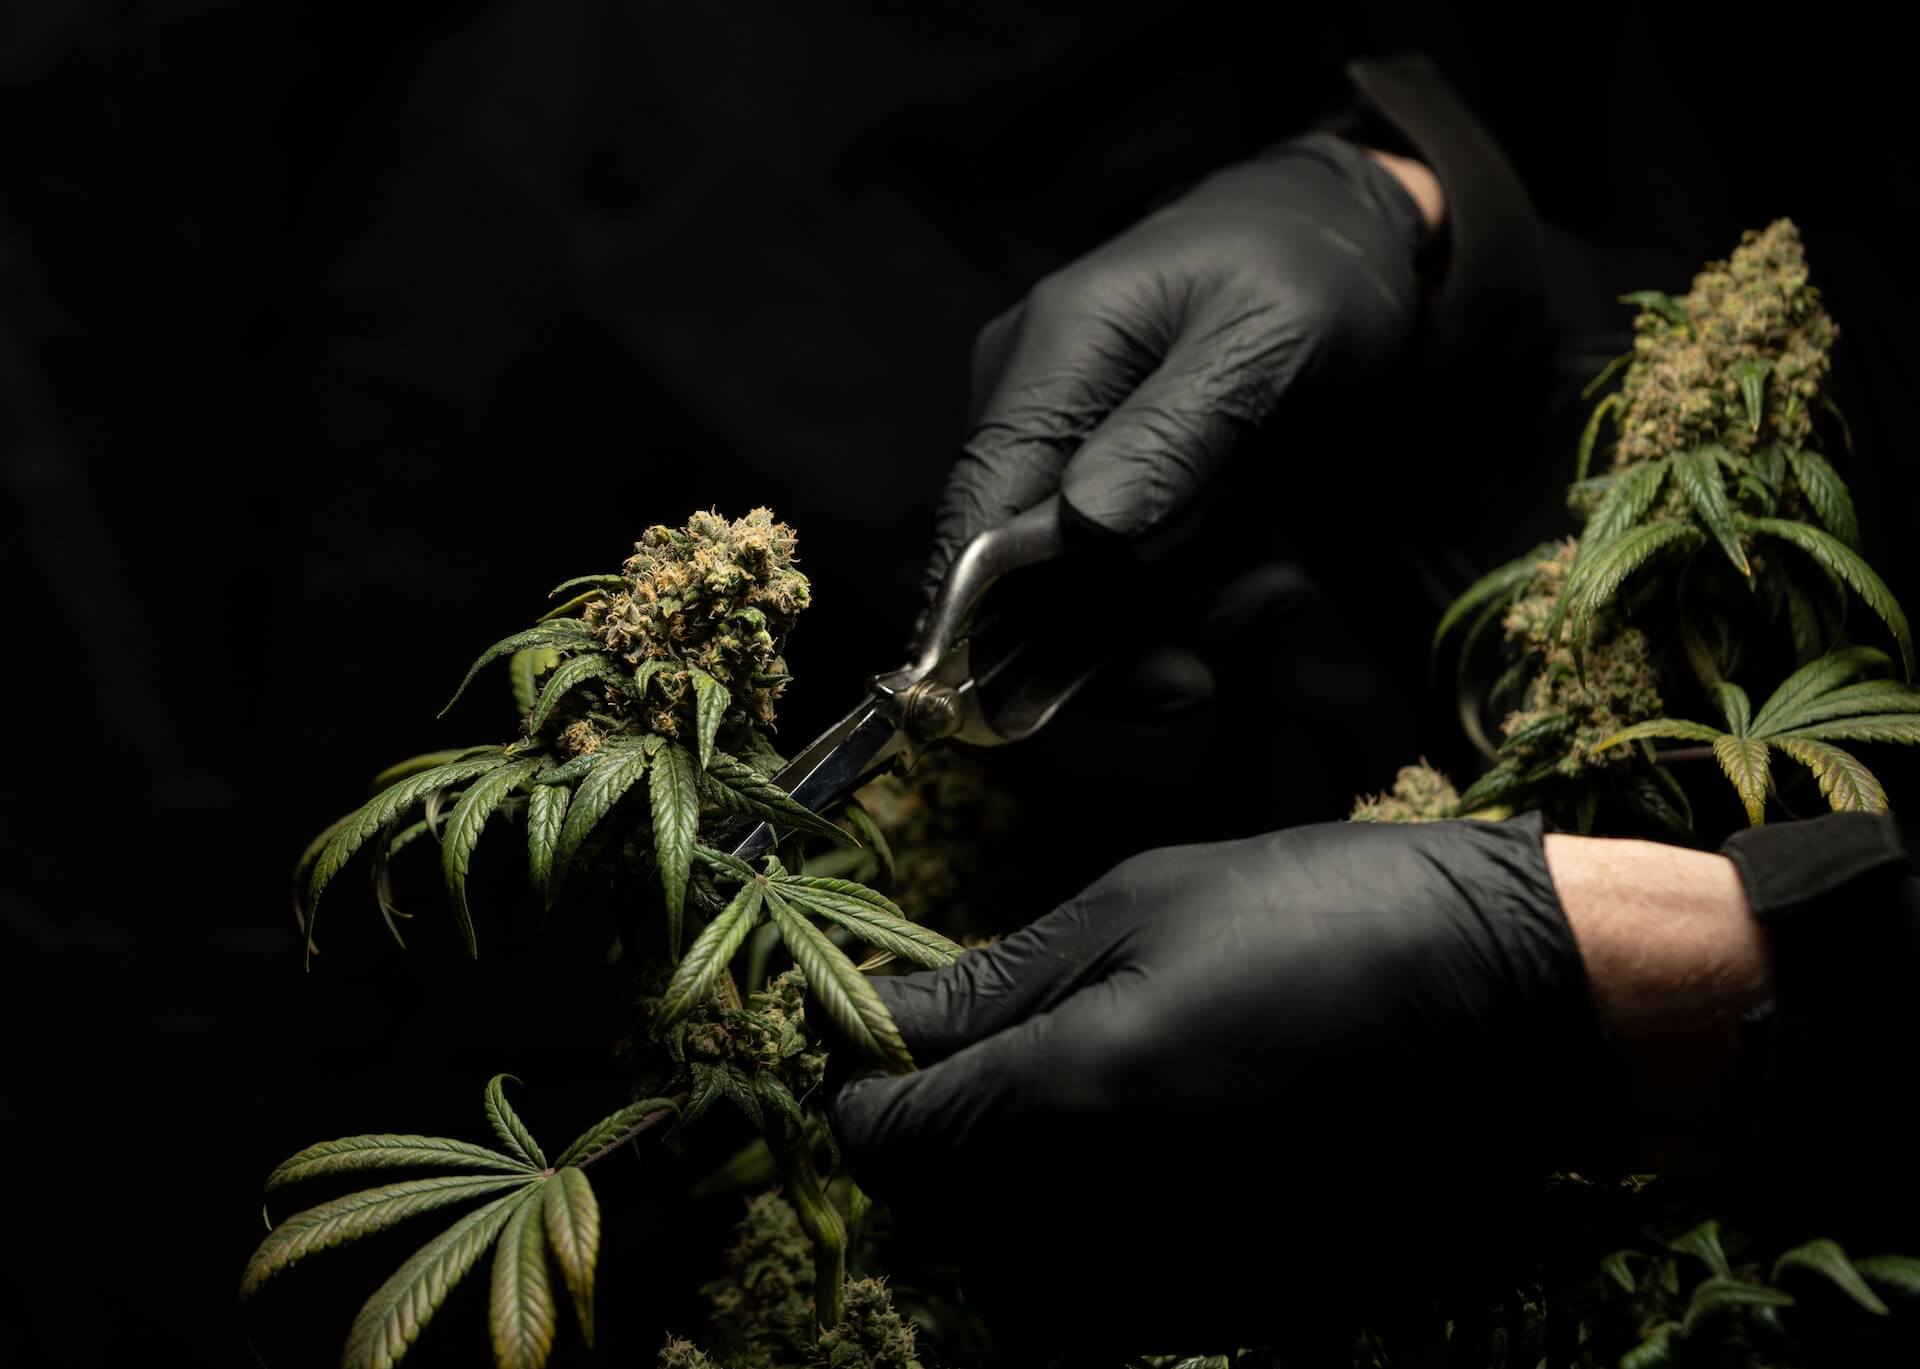 Two gloved hands harvesting a cannabis flower